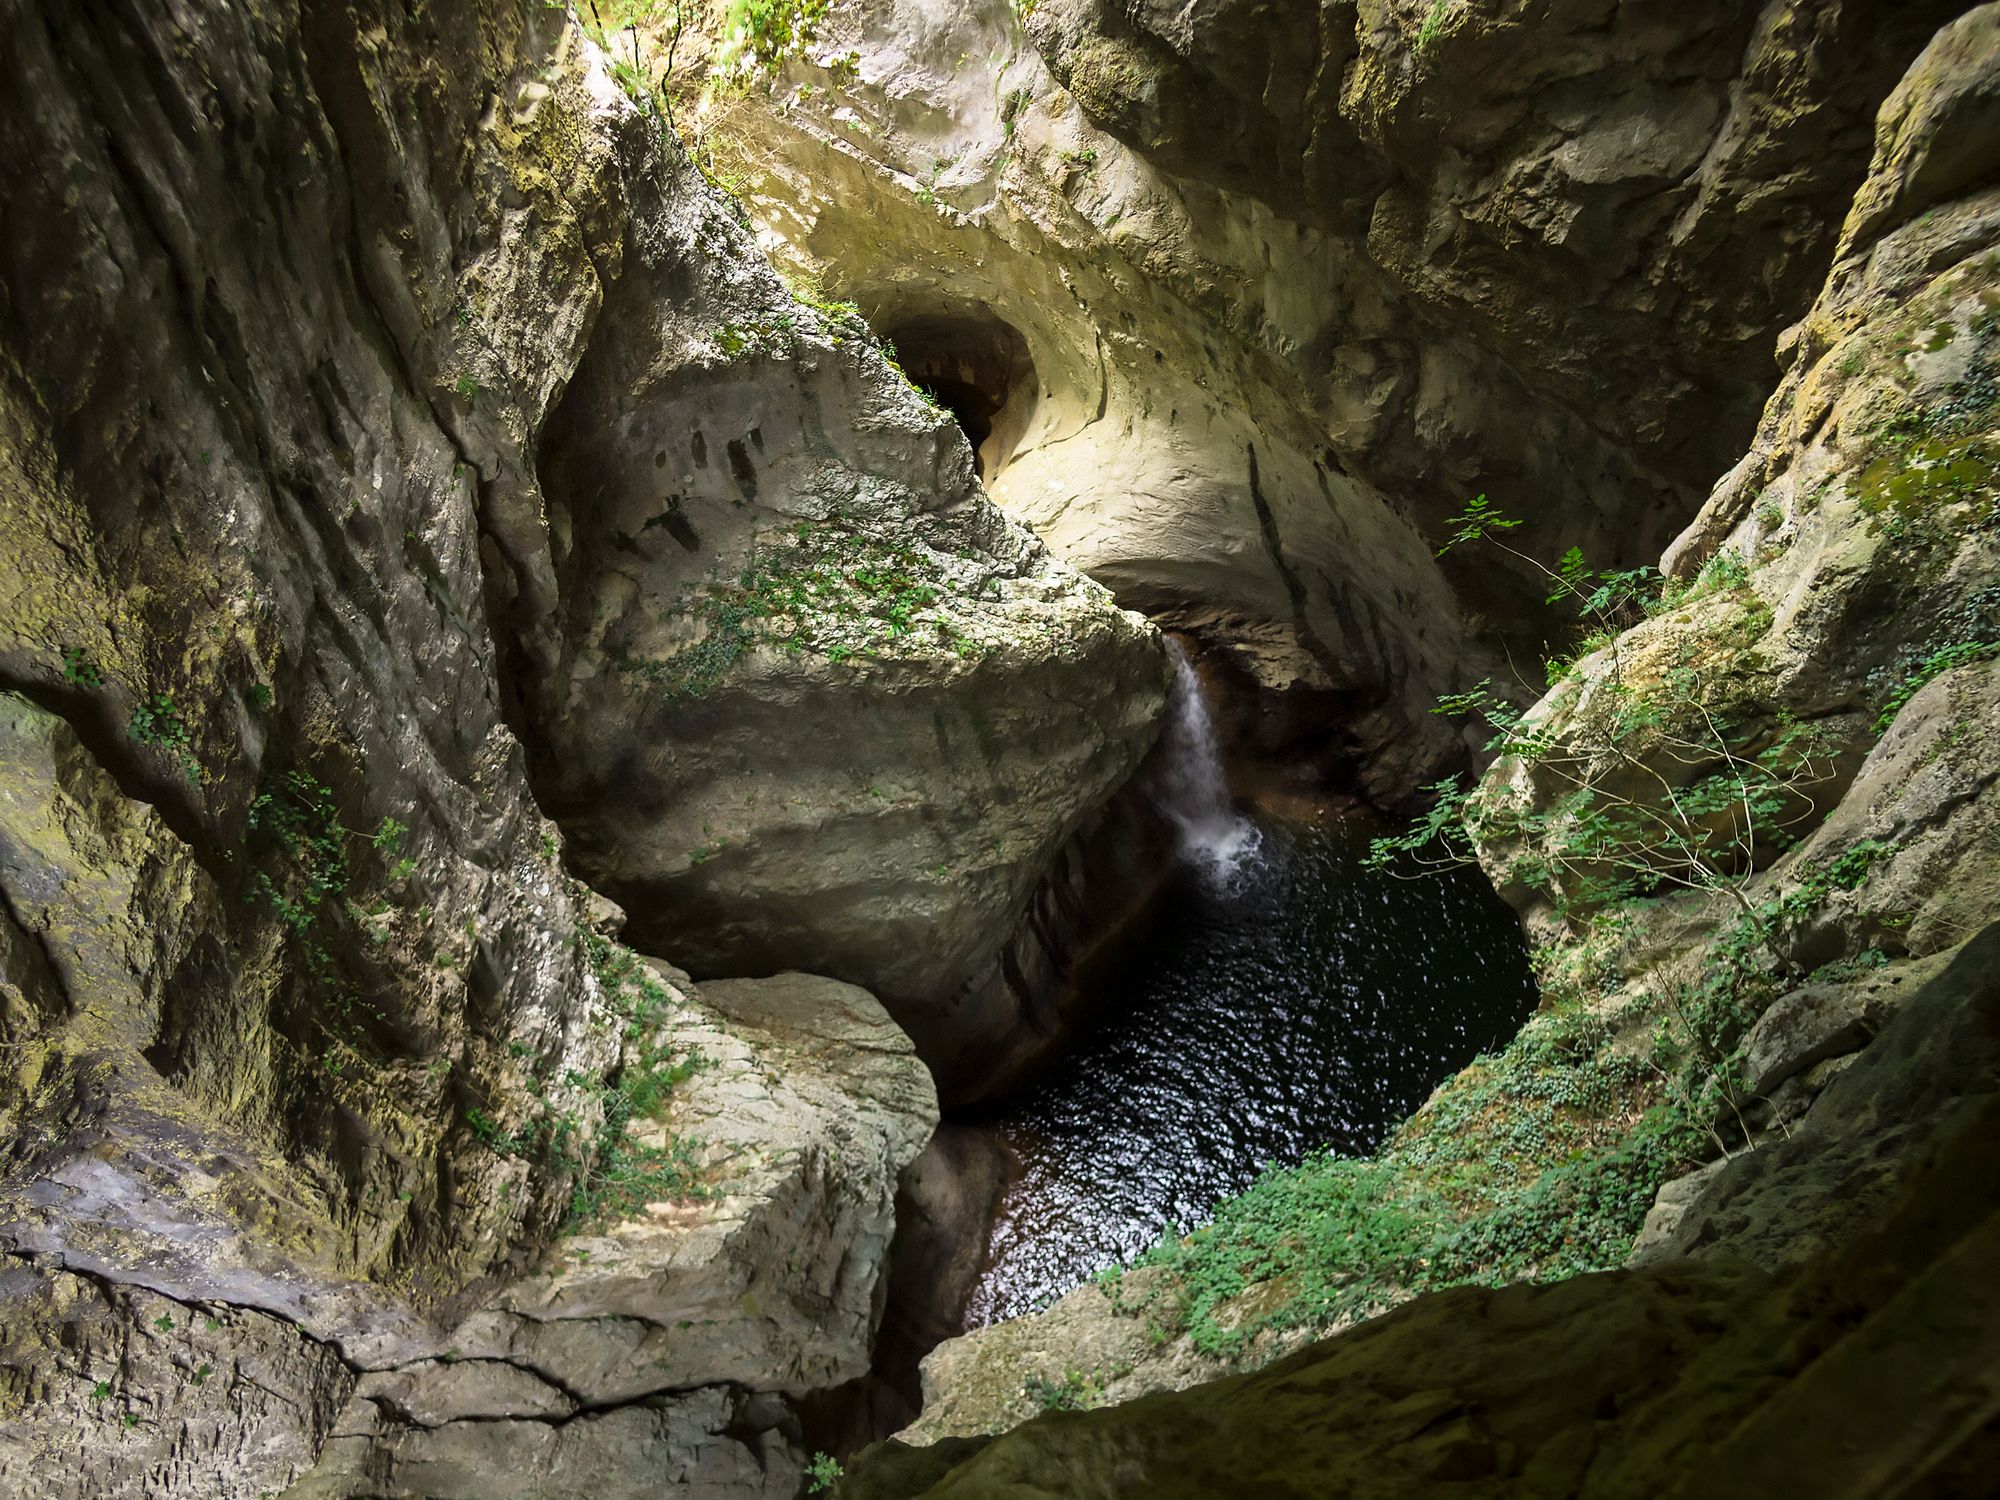 The entrance to the Skocjan Caves. Photo: Getty